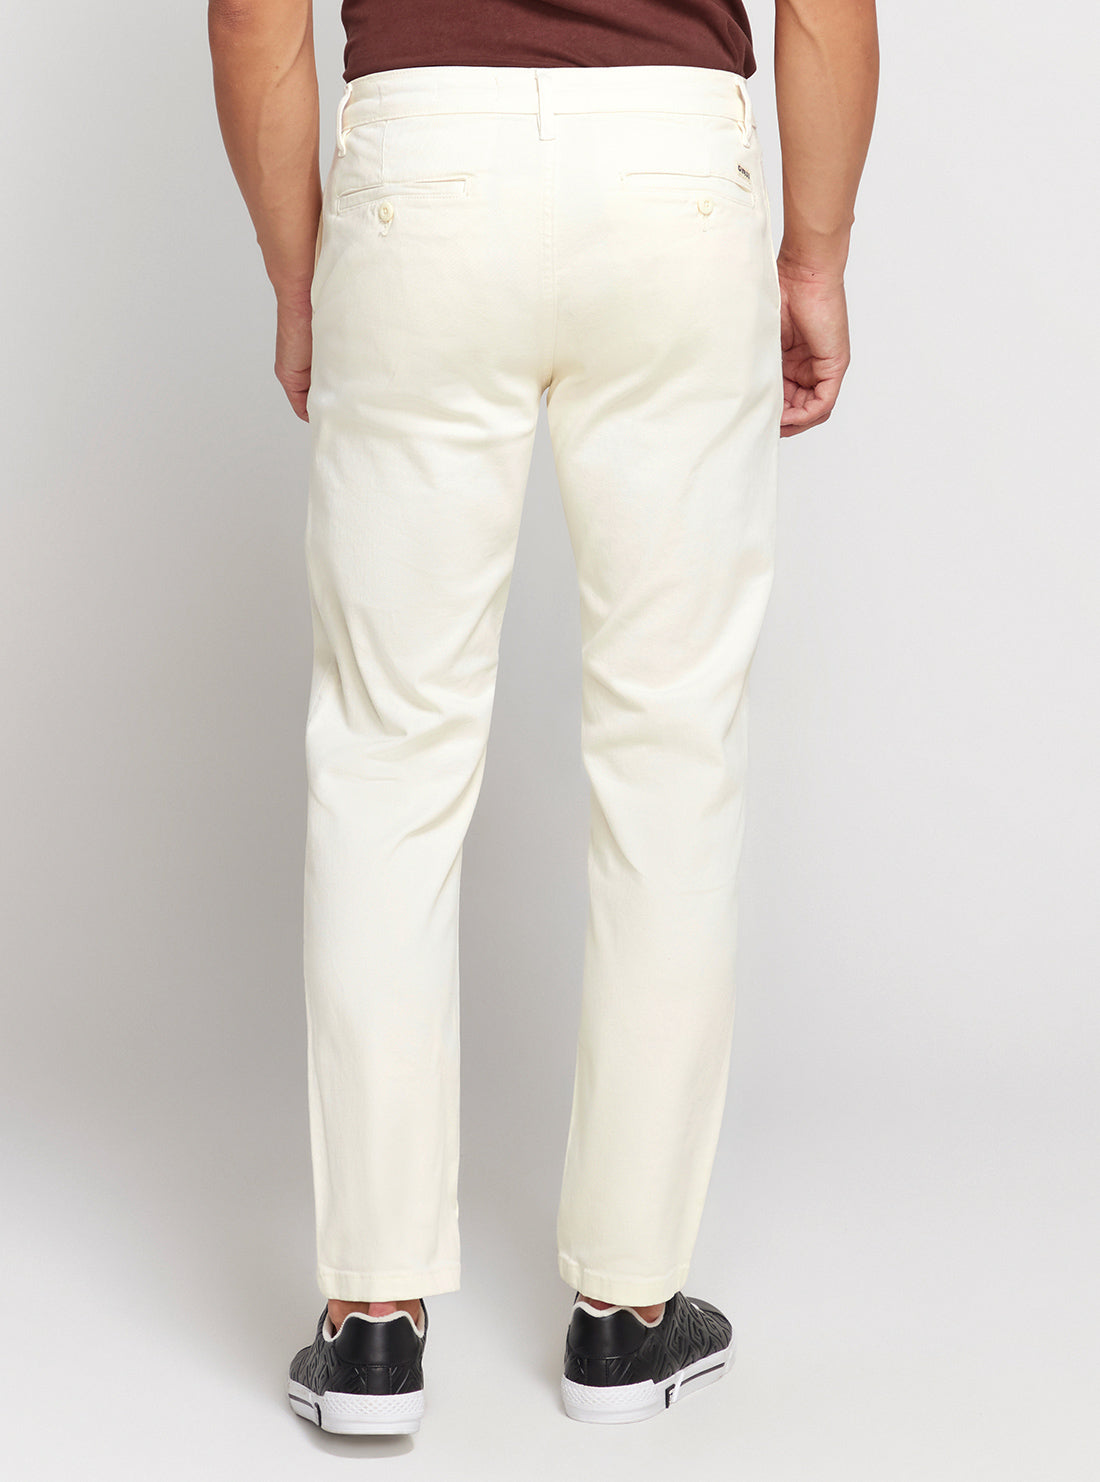 GUESS White Low-Rise Straight-leg Angel Chino Pants back view